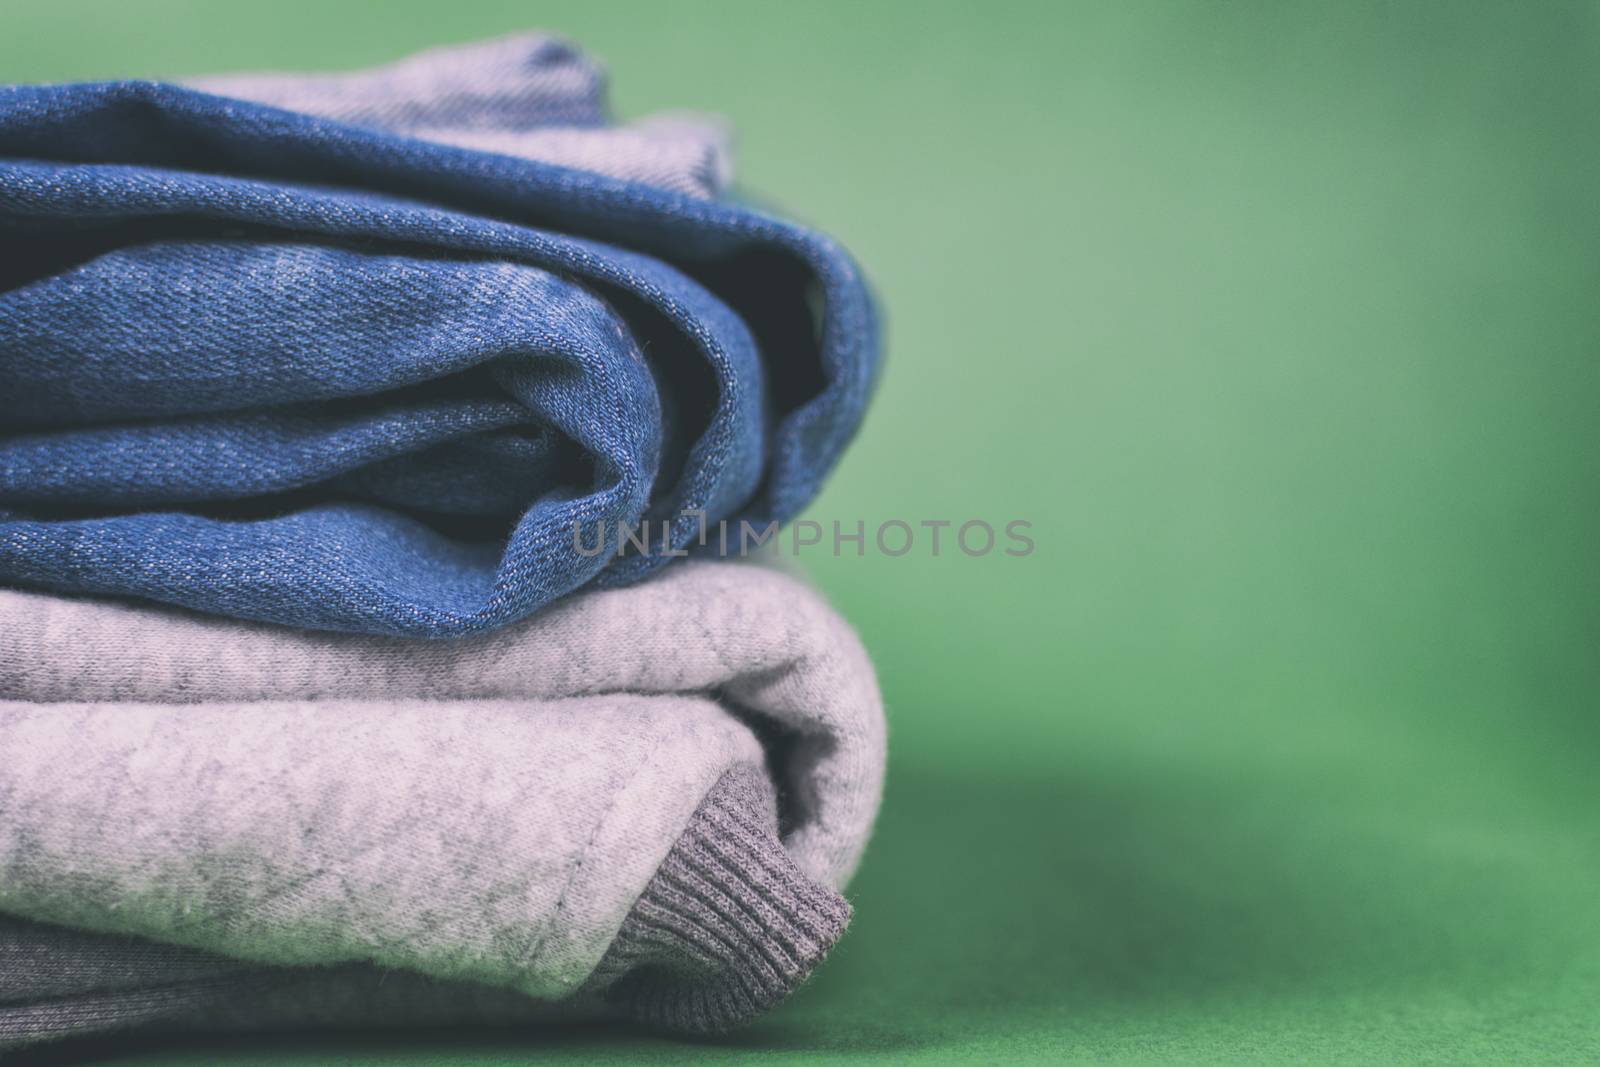 Warm and fashionable women's denim clothing folded on a colored background.